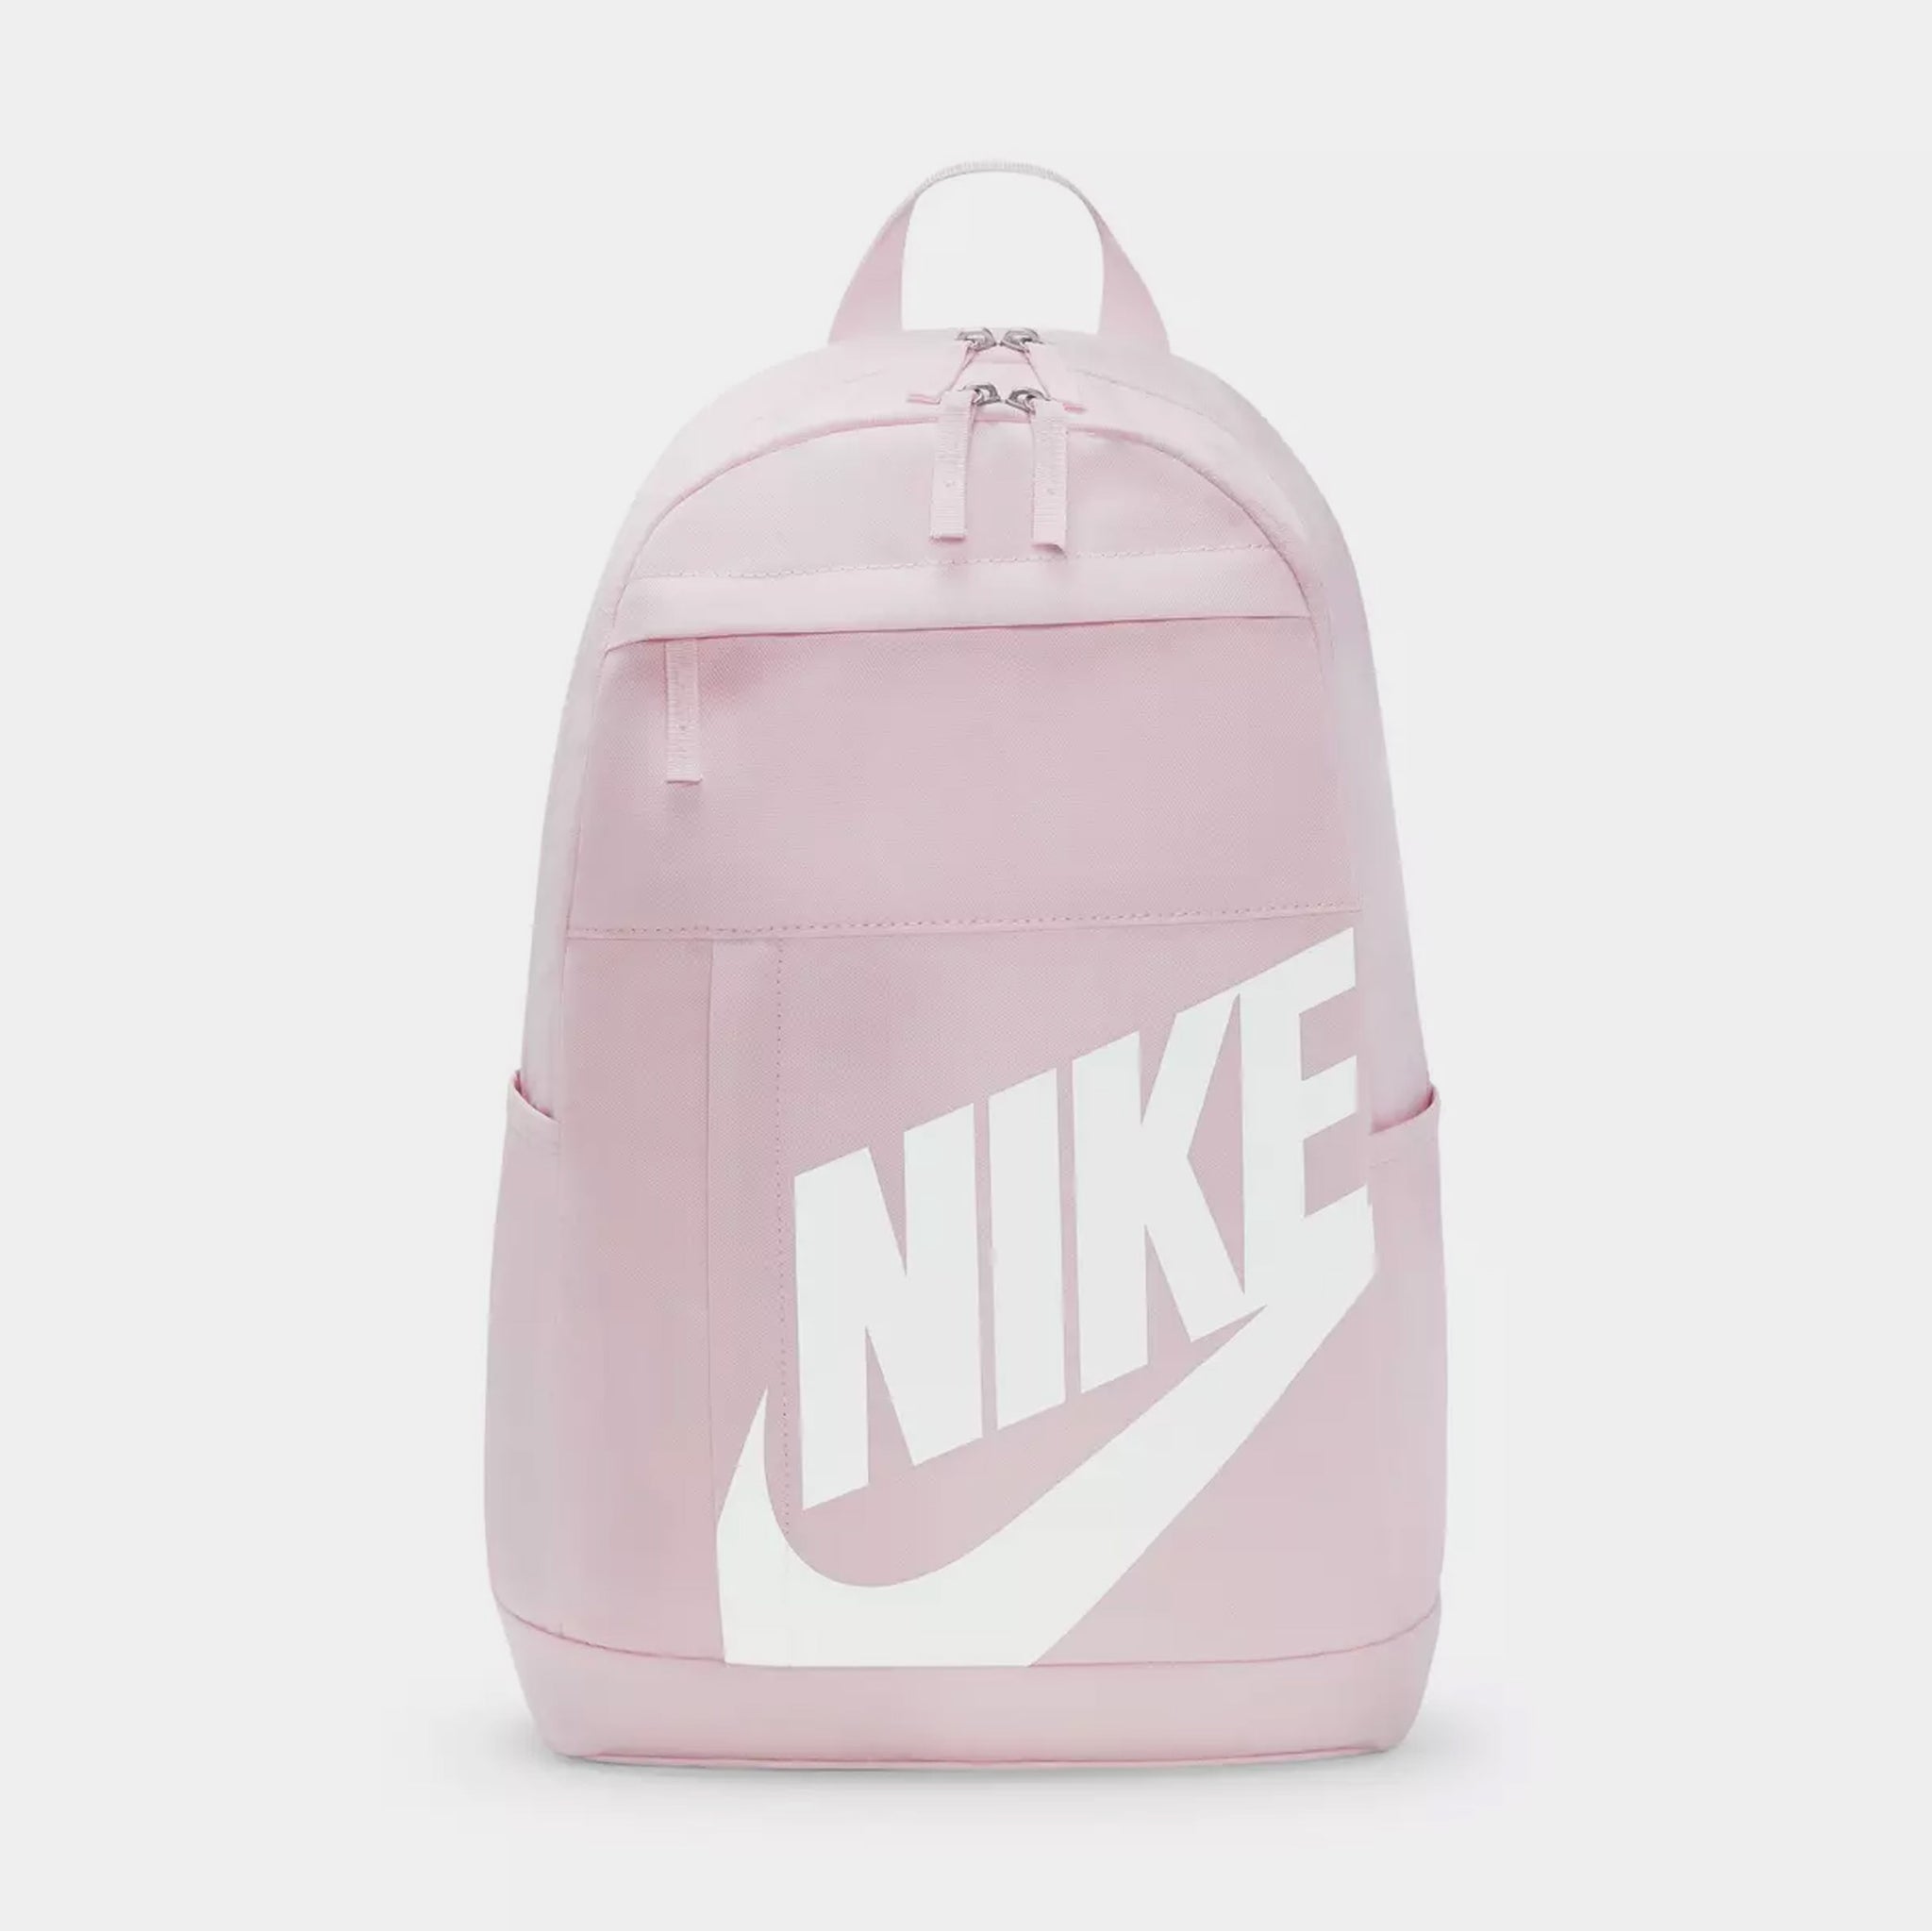 New NIKE Pink Small Backpack (13